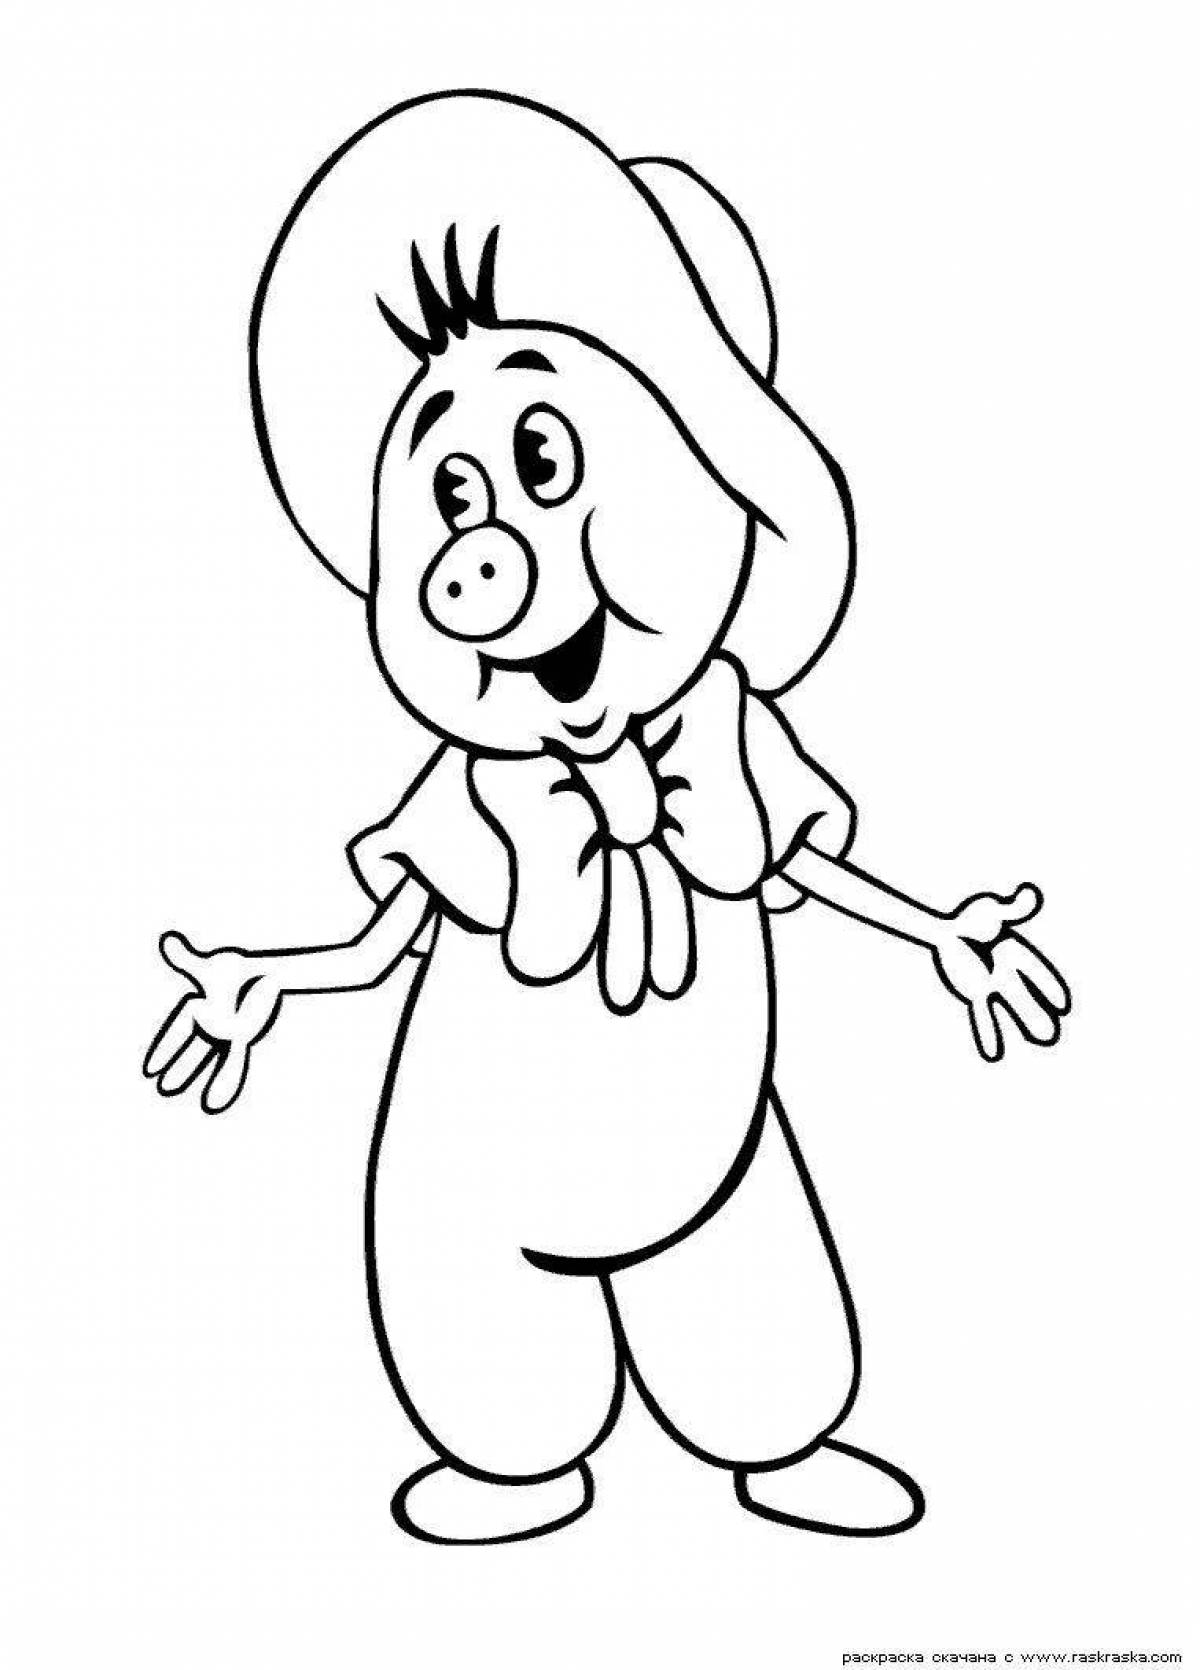 Tempting cartoon character coloring page